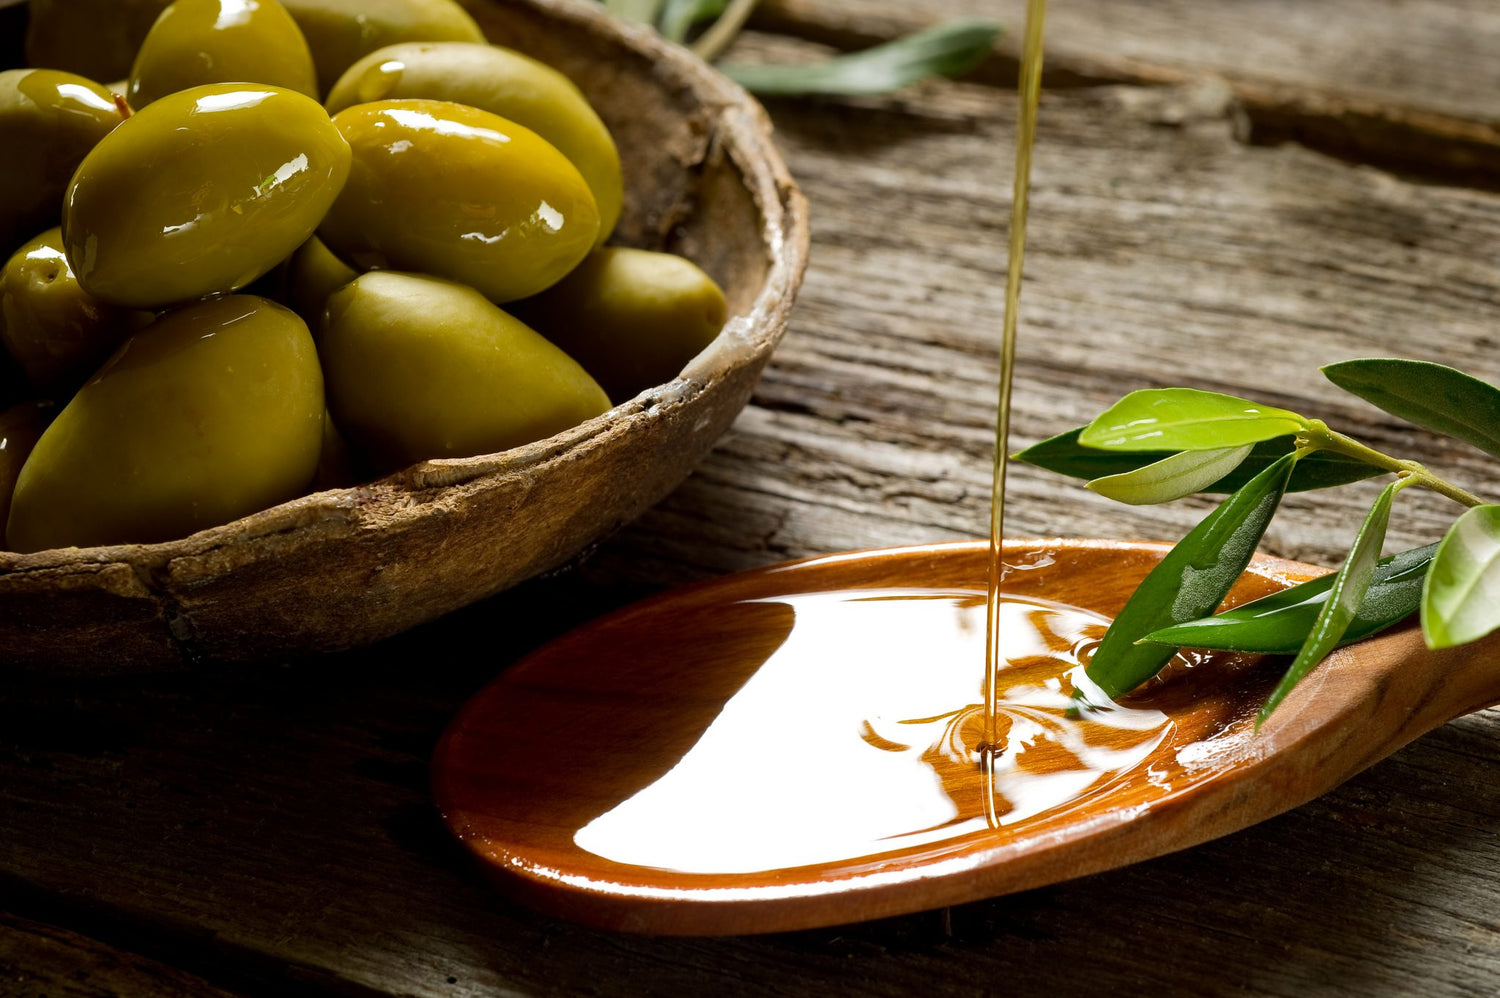 Consuming EVOO on an Empty Stomach May Provide Unique Health Benefits